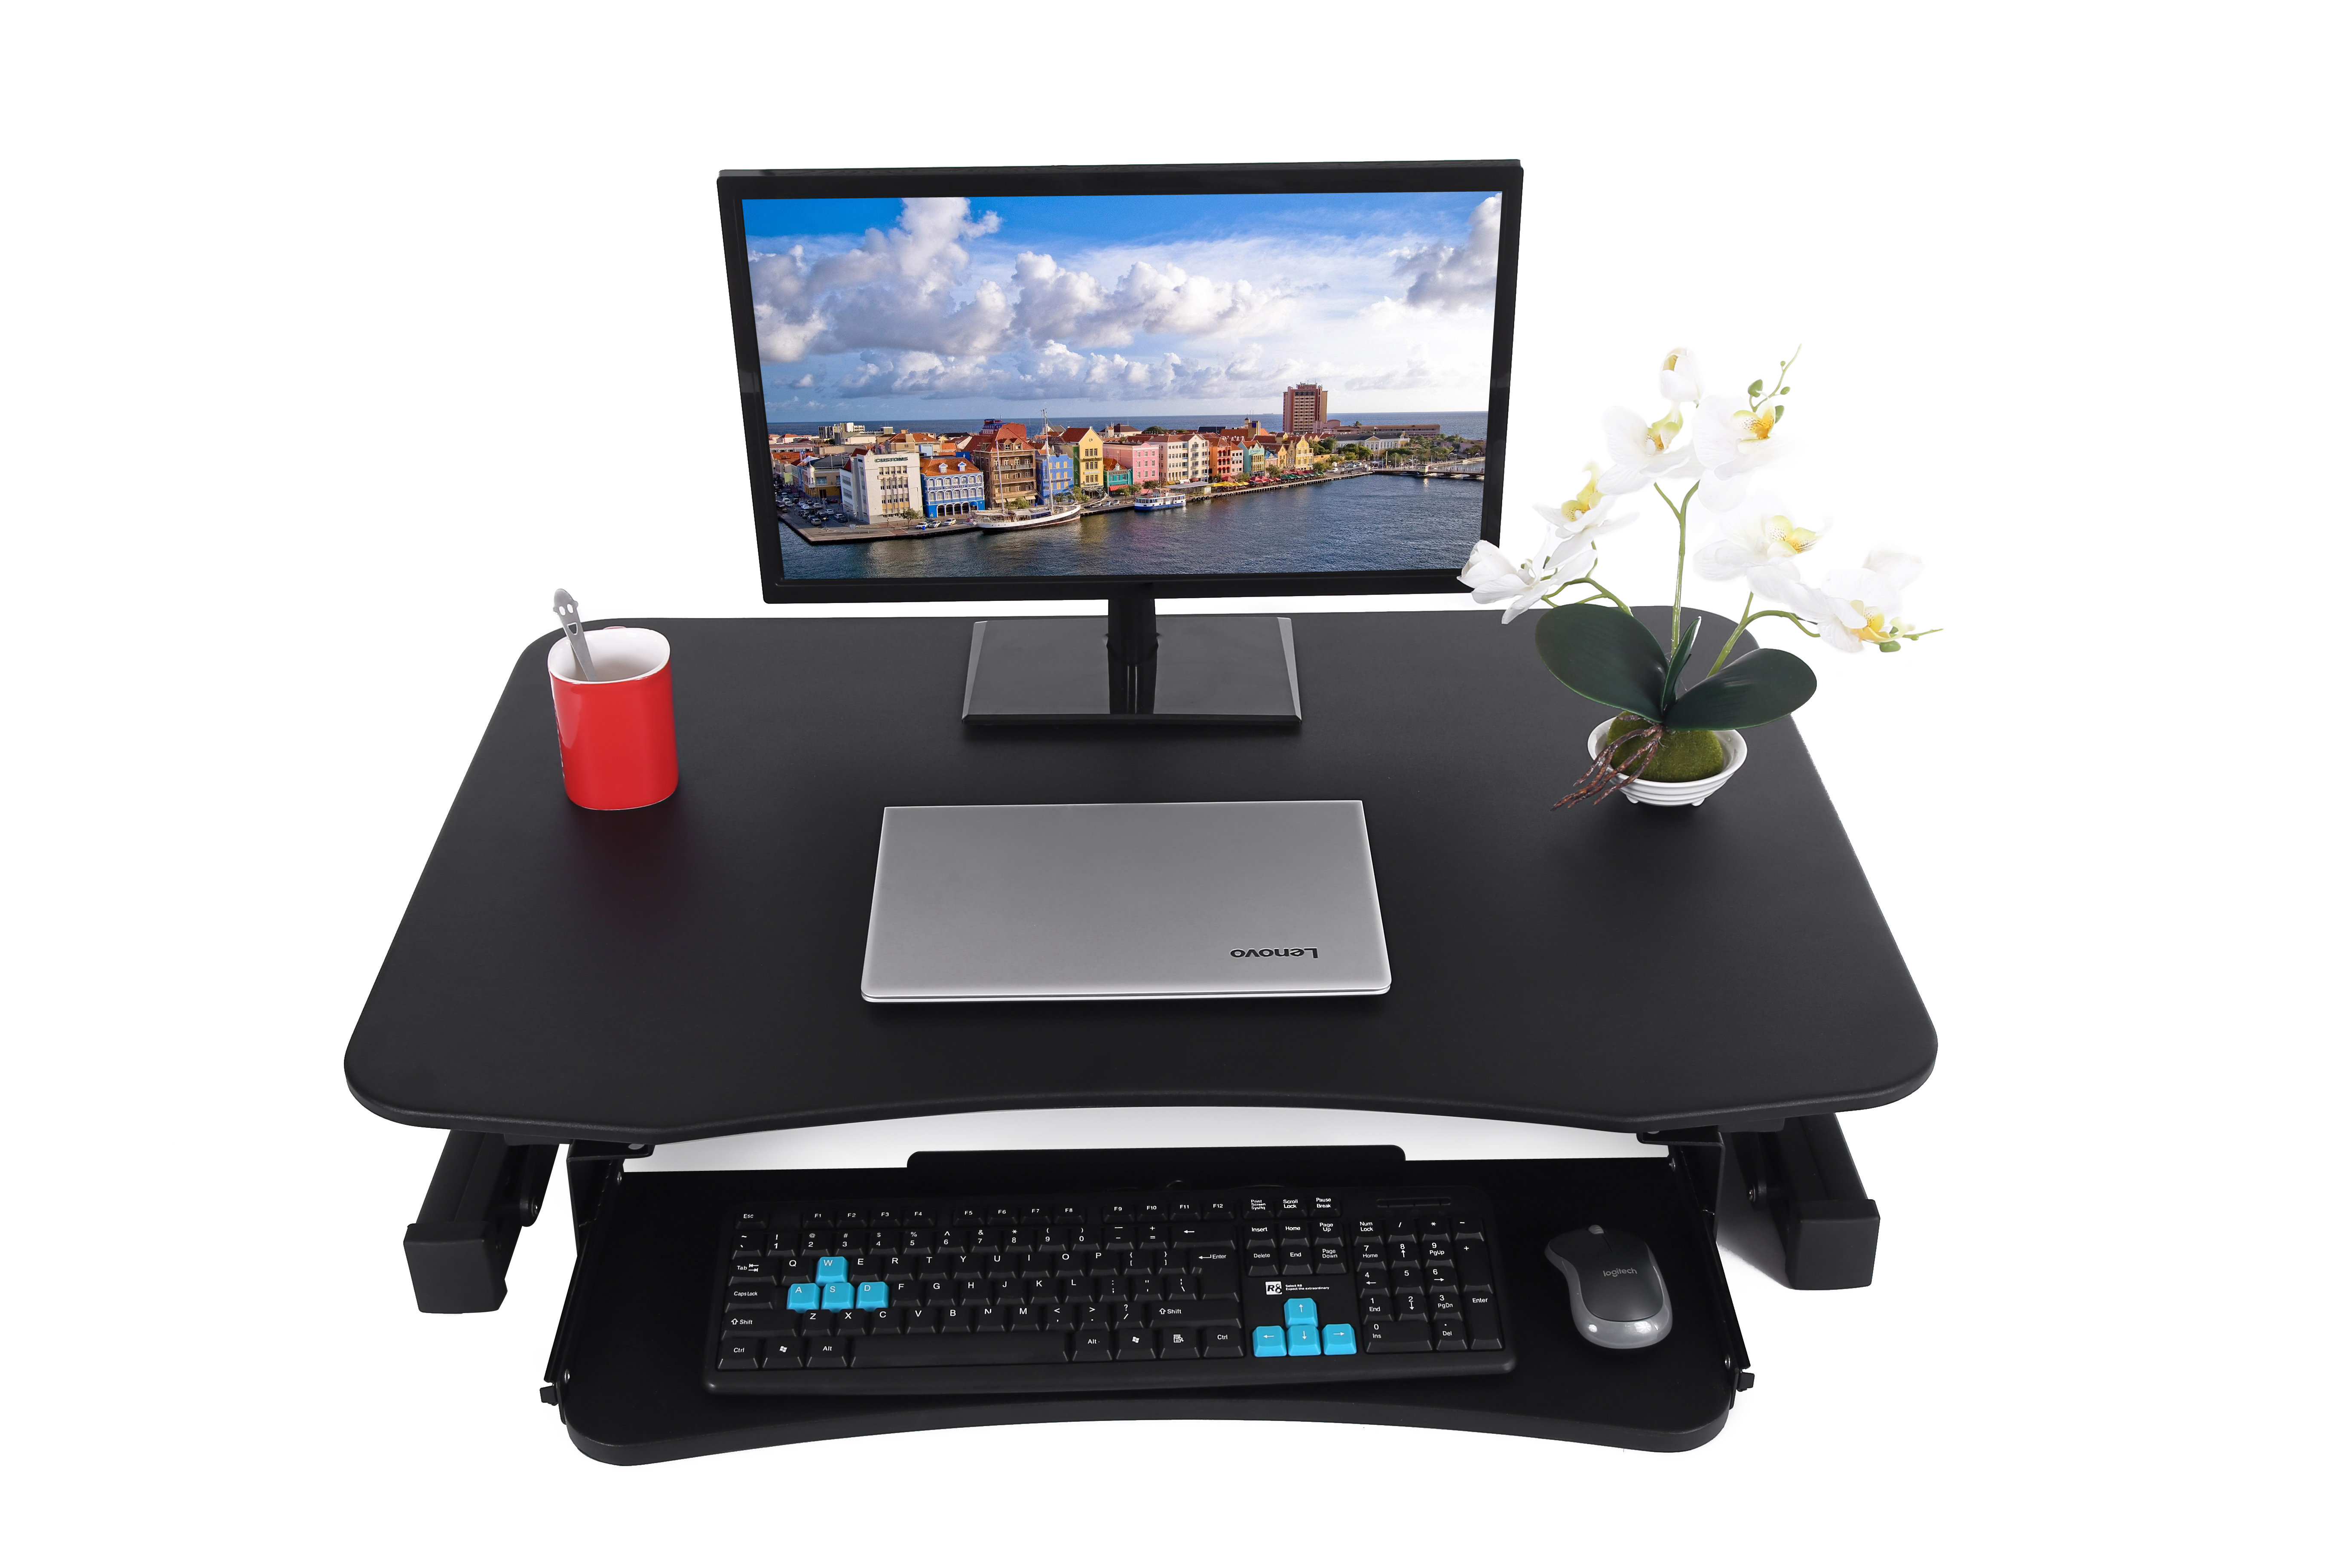 ApexDesk ZT Series Height Adjustable Sit to Stand Electric Desk Converter, 2-Tier Design with Large 36x24" Upper Work Surface and Lower Keyboard Tray Deck (Black) - image 4 of 8